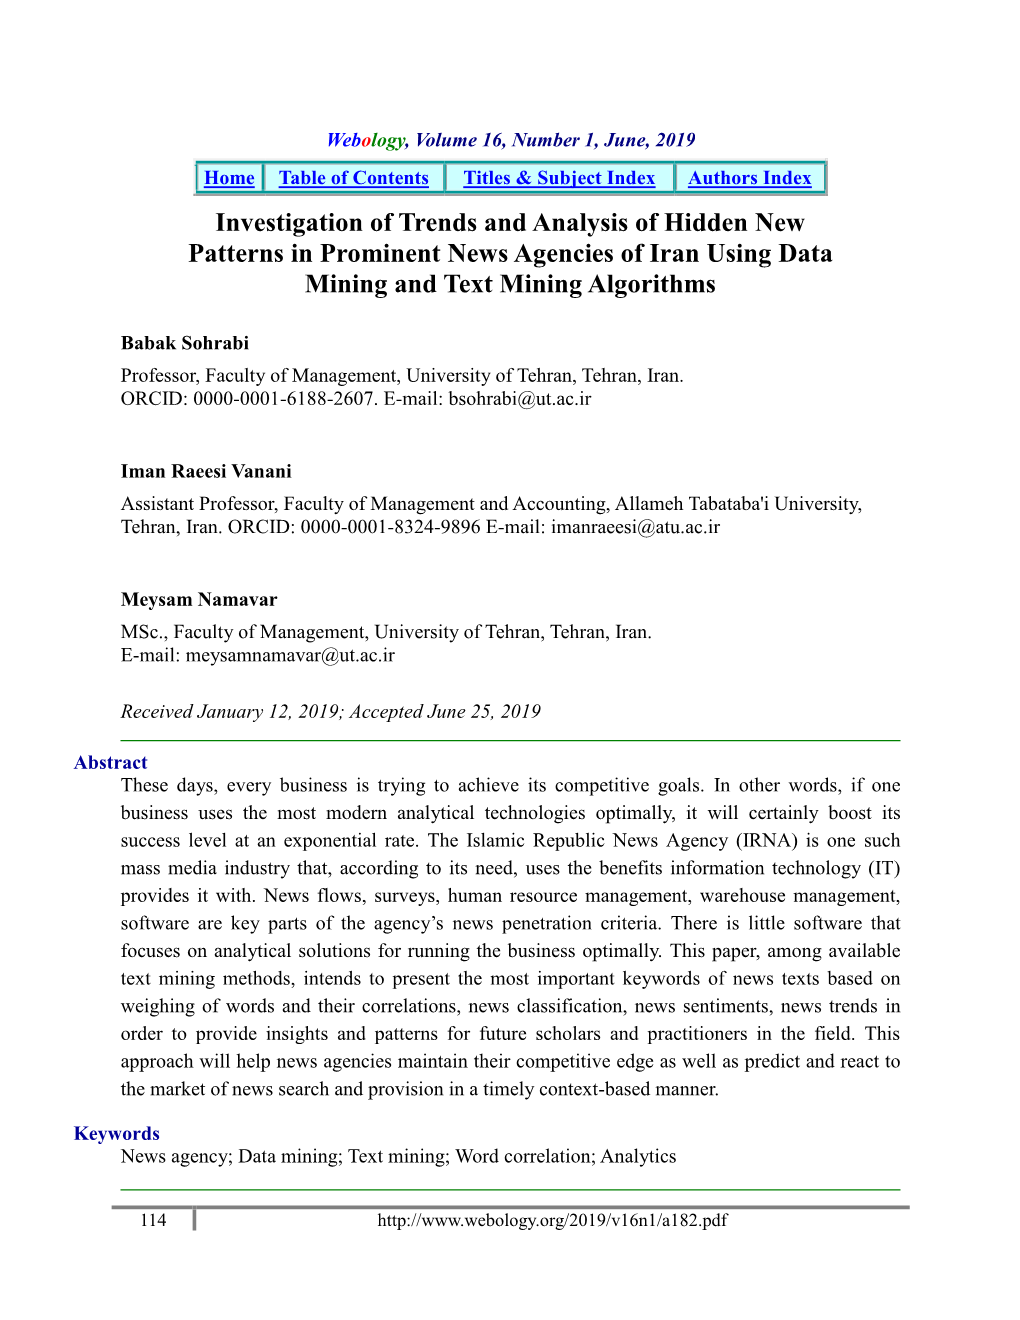 Investigation of Trends and Analysis of Hidden New Patterns in Prominent News Agencies of Iran Using Data Mining and Text Mining Algorithms